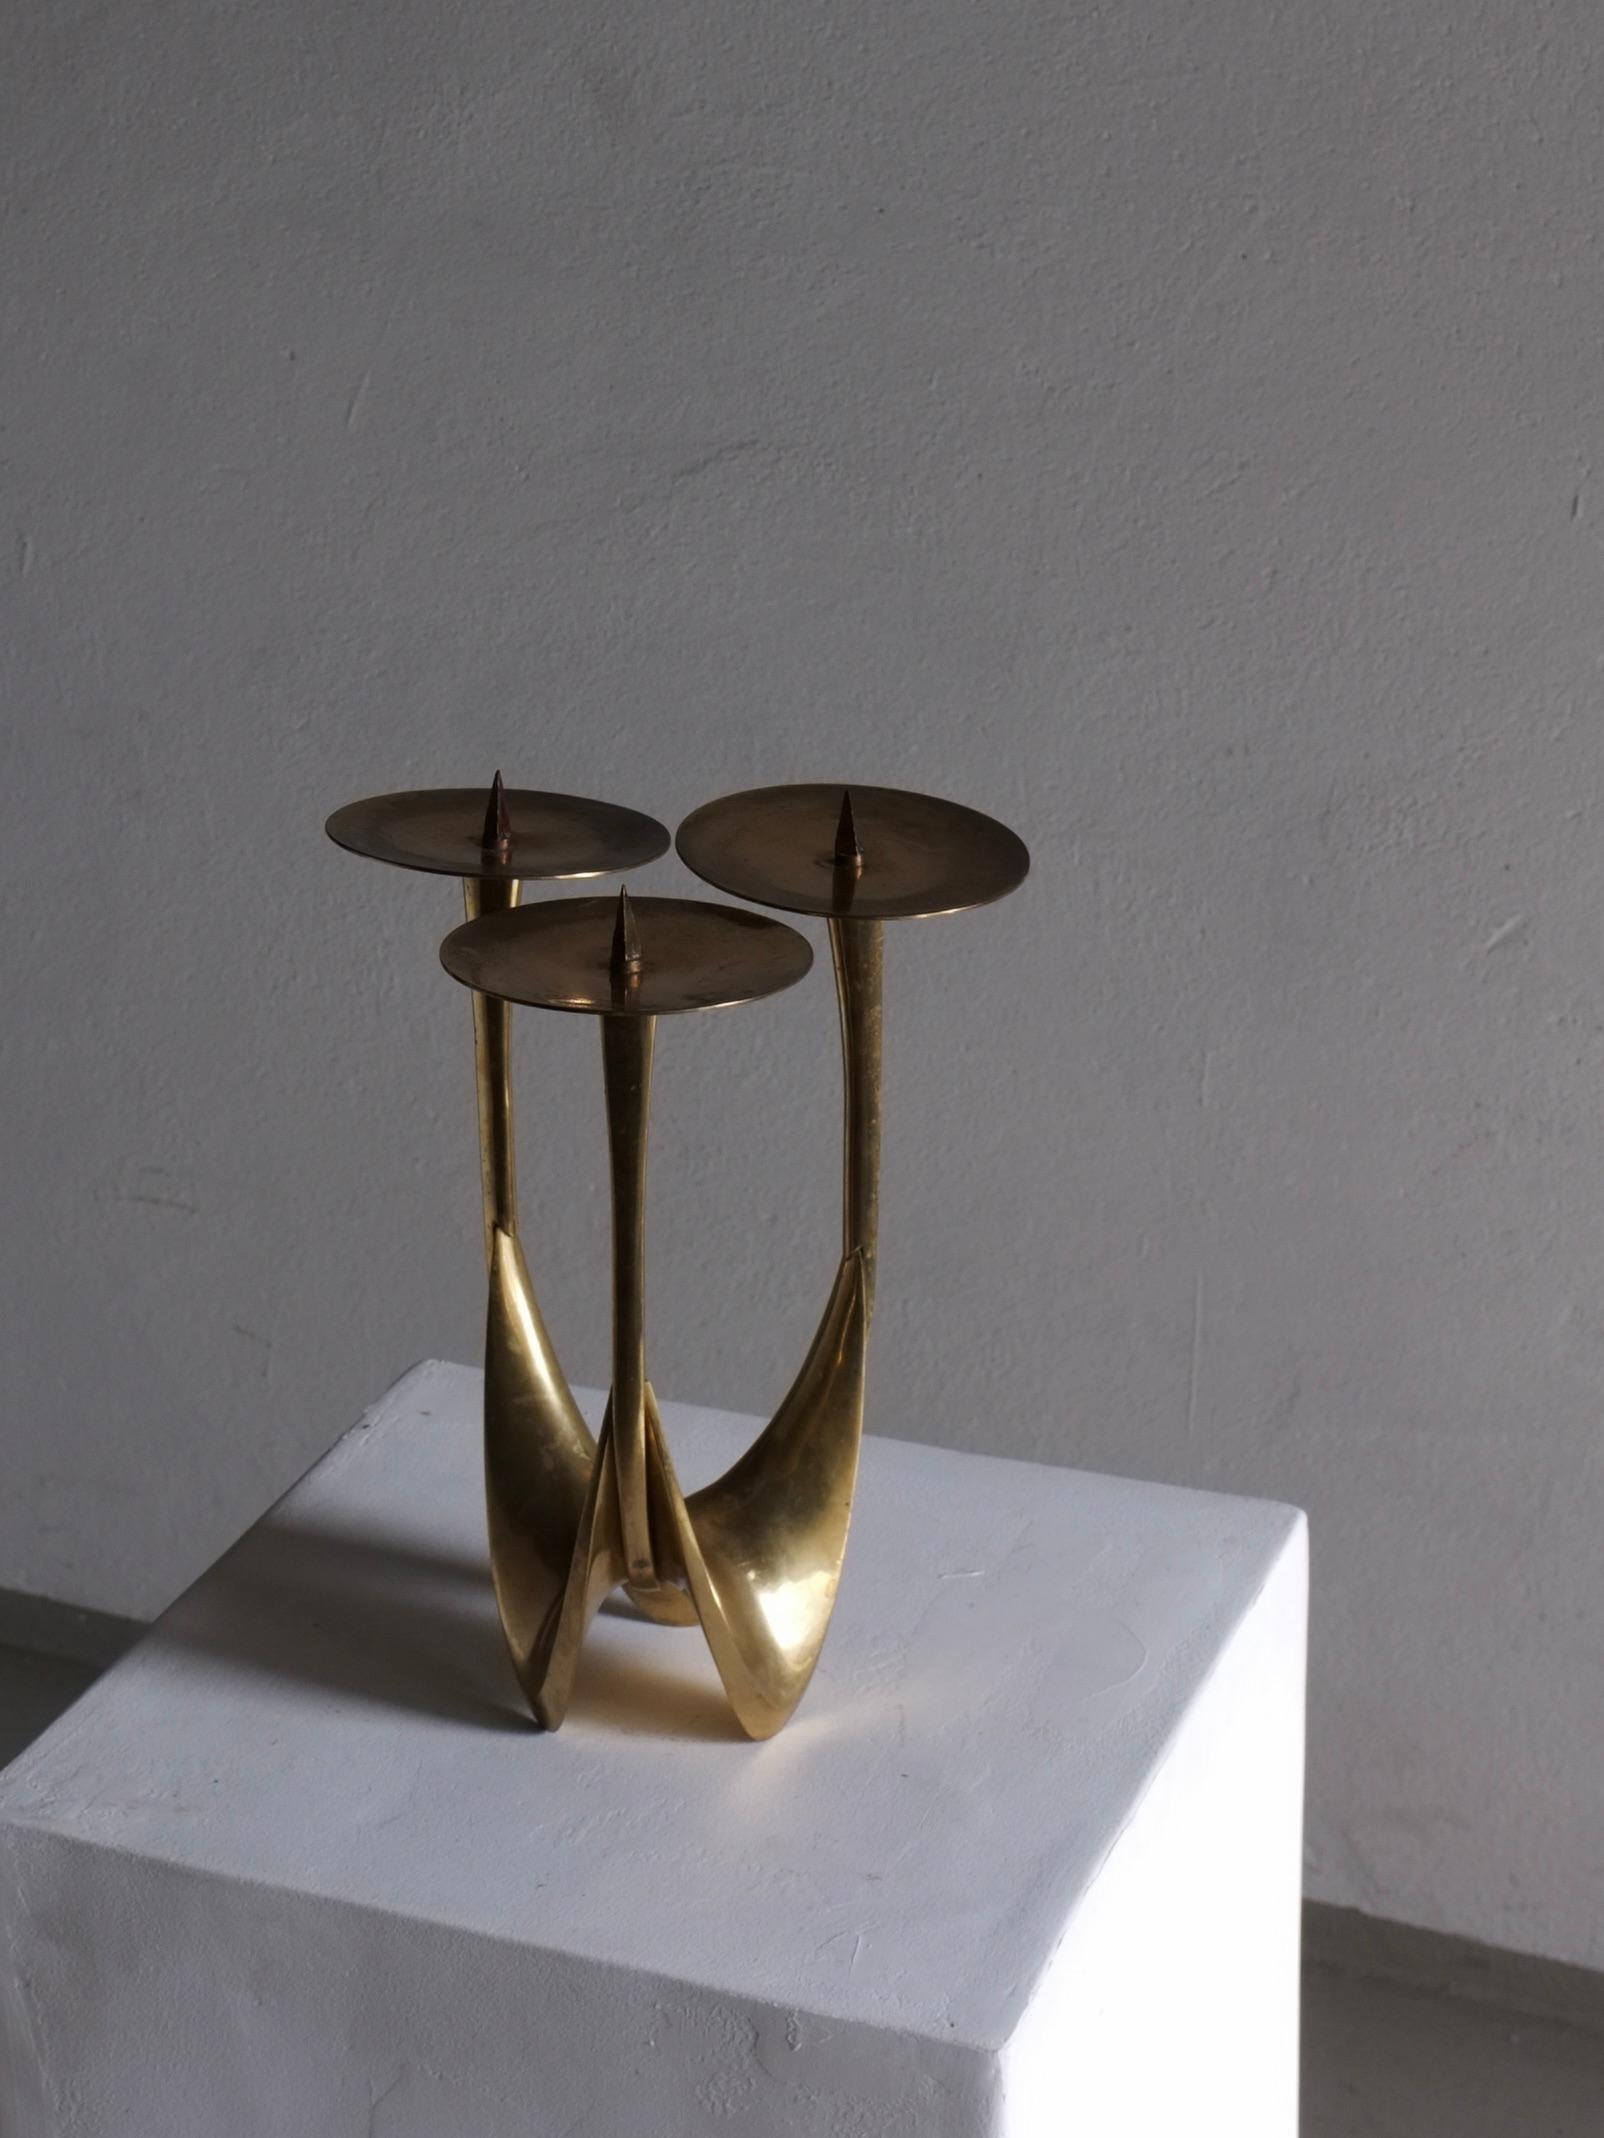 German Brutalist Brass Candle Holder by Klaus Ullrich, Faber and Schumacher, 1950s For Sale